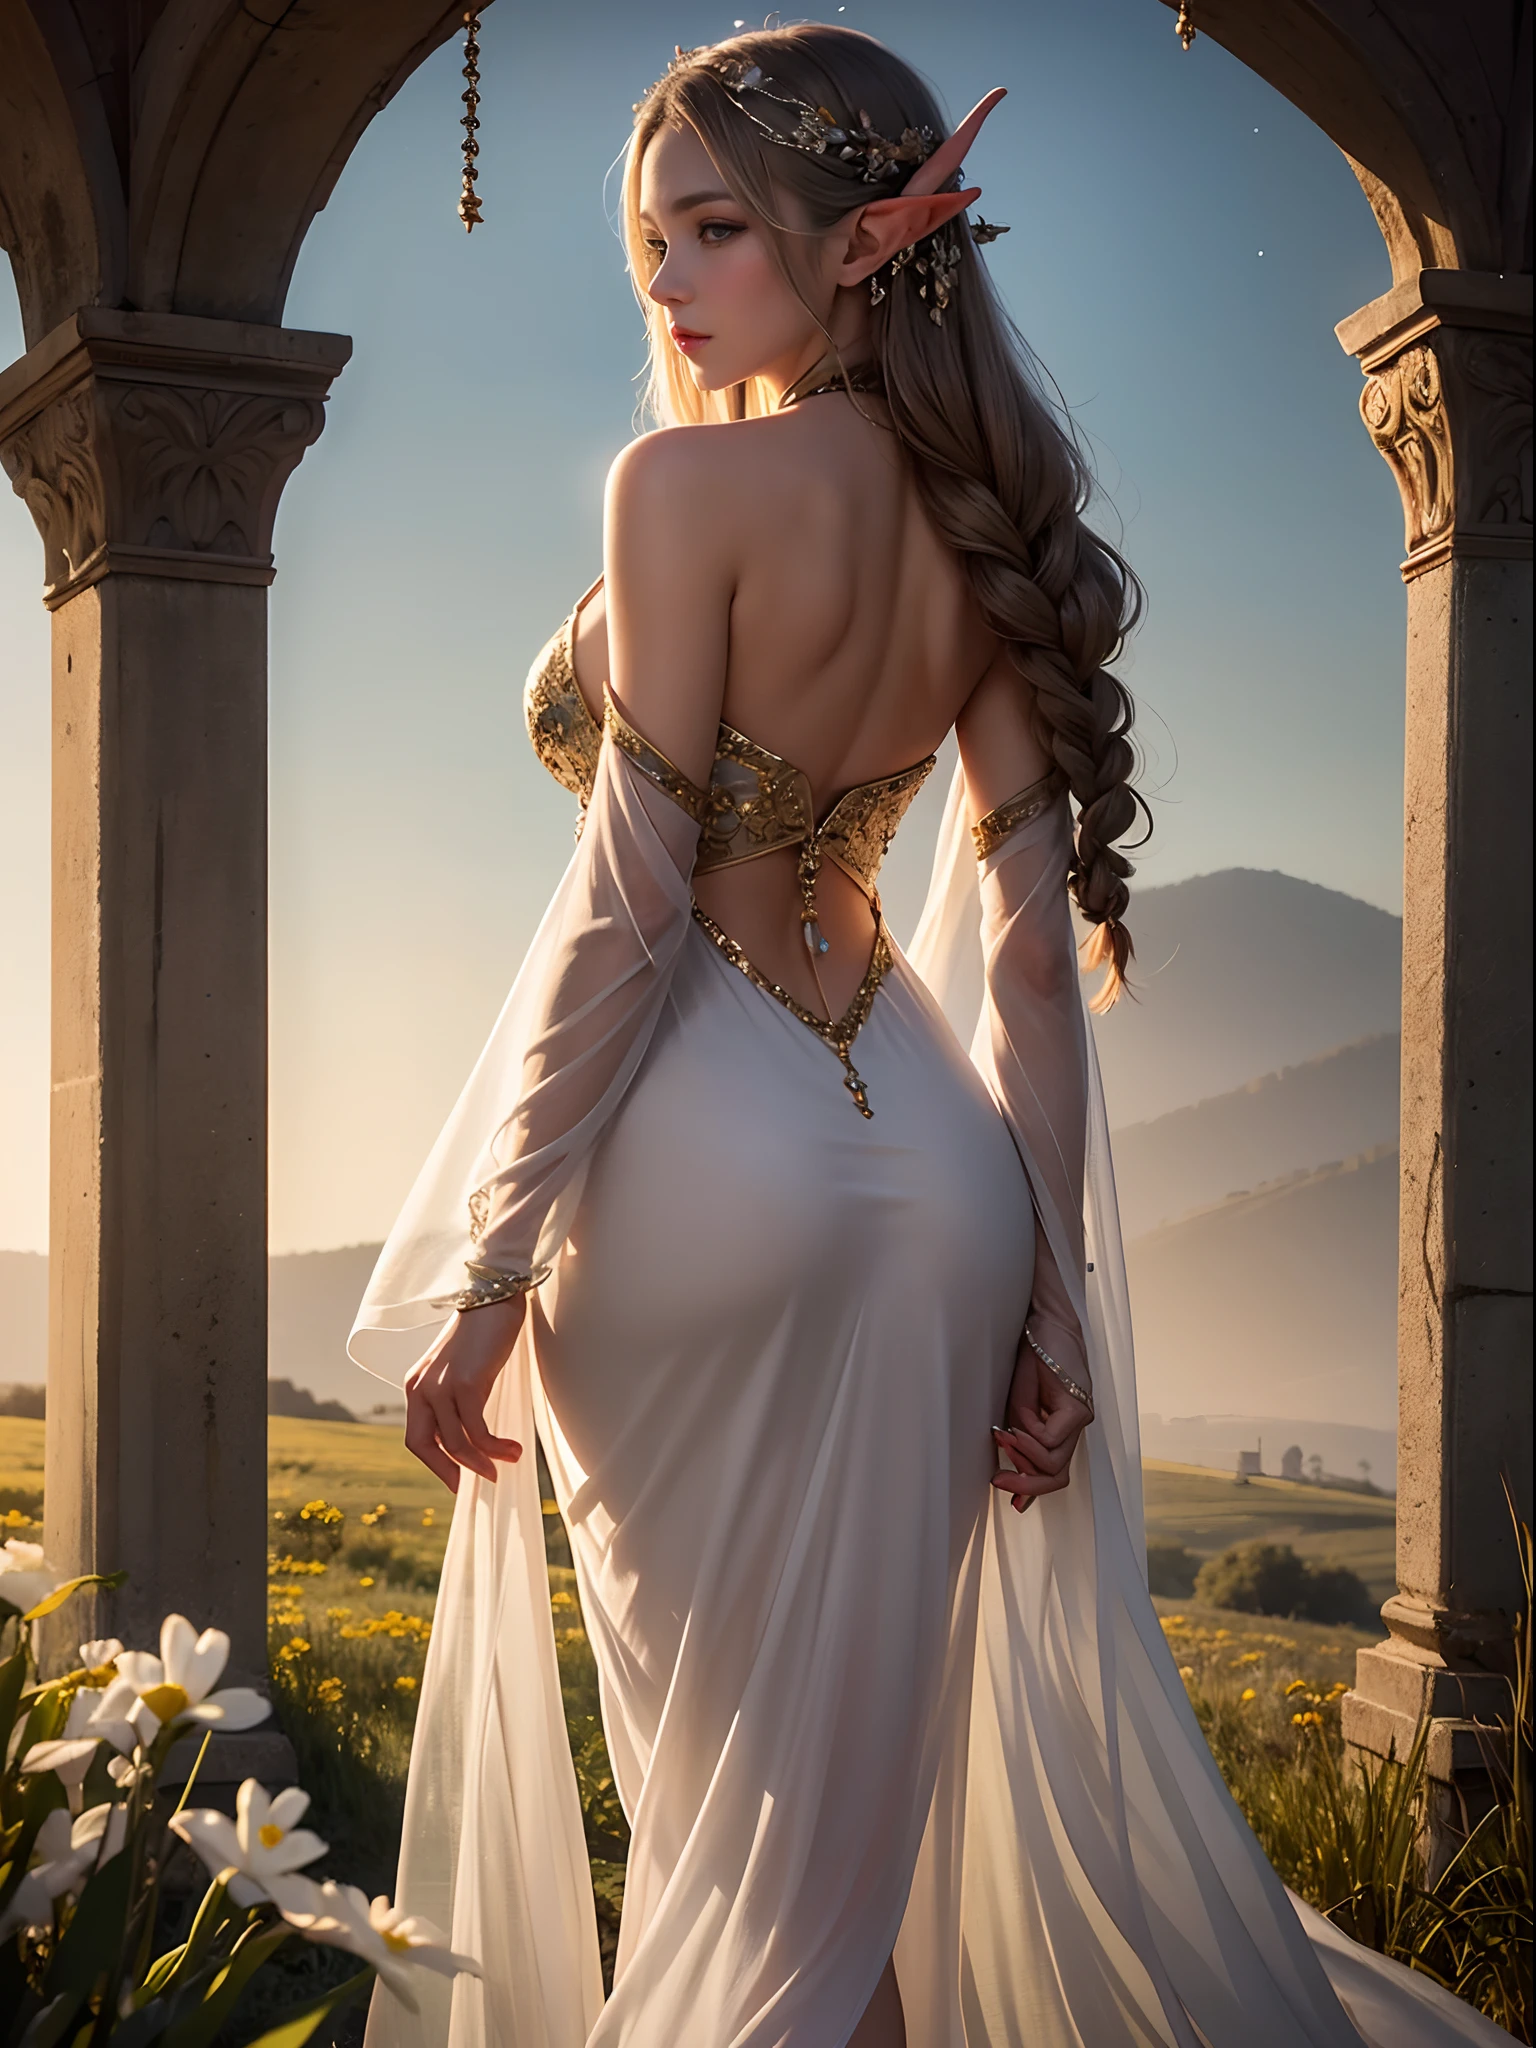 Graceful elven girl standing in the meadow, A delicate face illuminated by the soft light of the setting sun. Her long, Flowing hair flows down the back, Decorated with intricate braids、Adorned with sparkling gemstones. This stunning painting is、It captures the ethereal beauty of elves. Her slender figure in a silk dress、Swaying in the soft meadow breeze. Attention to detail、It is evident in the intricate patterns of the dress and the subtle highlights of the luminescence. skin. The breathtaking portrayal of the elven girl is、Create an enchanting atmosphere、It invites the viewer to a magical world.